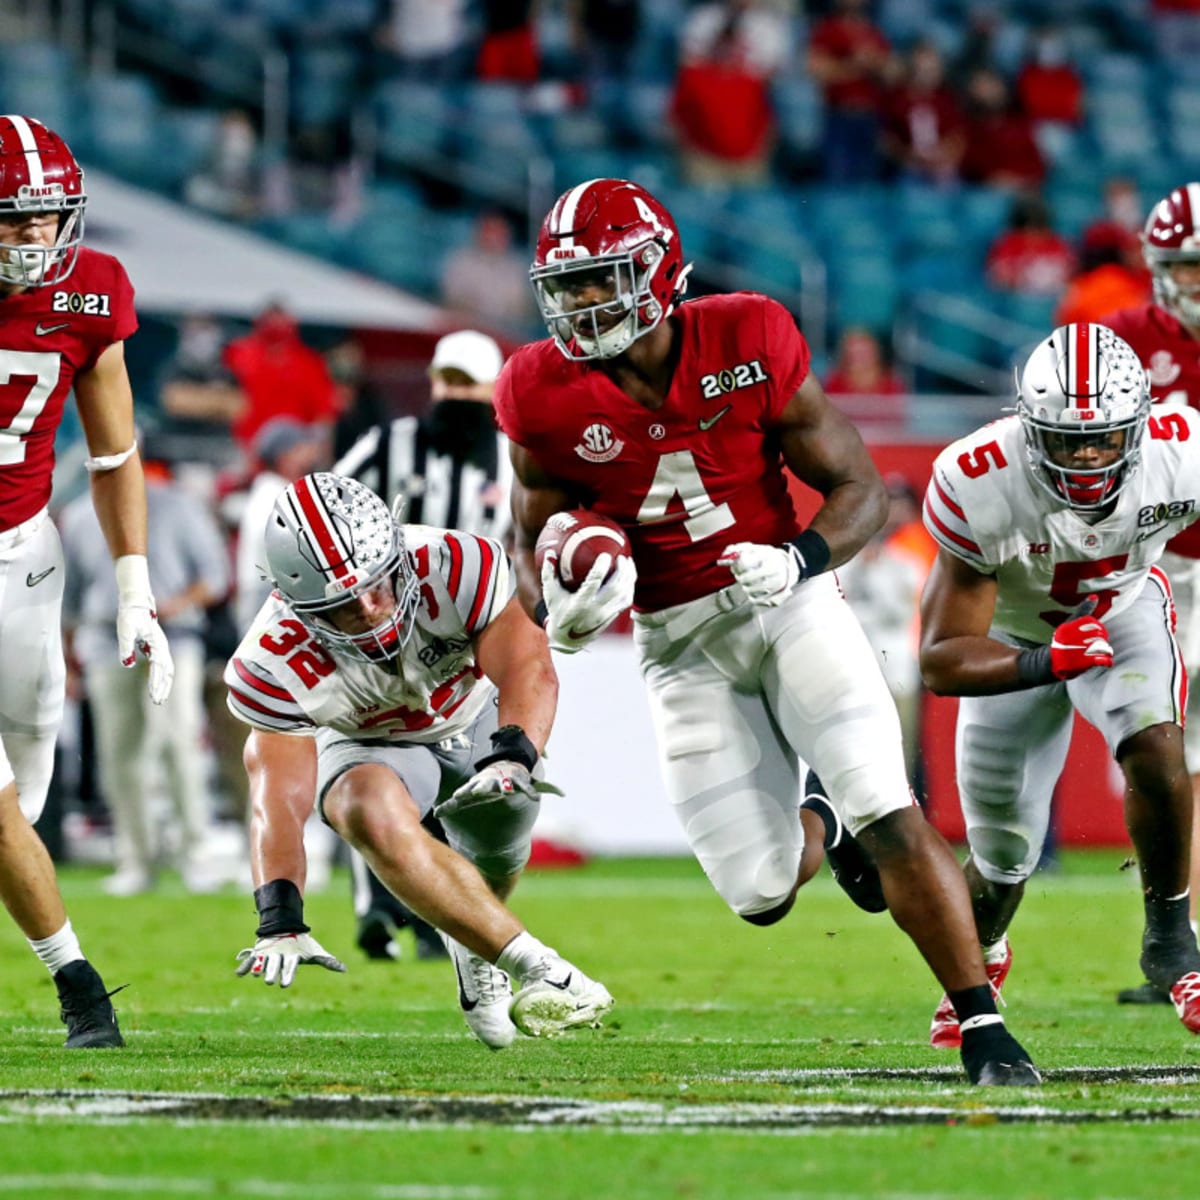 NFL Draft: 2022 Mock Draft - Edge Rushers Continue to Climb - Visit NFL  Draft on Sports Illustrated, the latest news coverage, with rankings for NFL  Draft prospects, College Football, Dynasty and